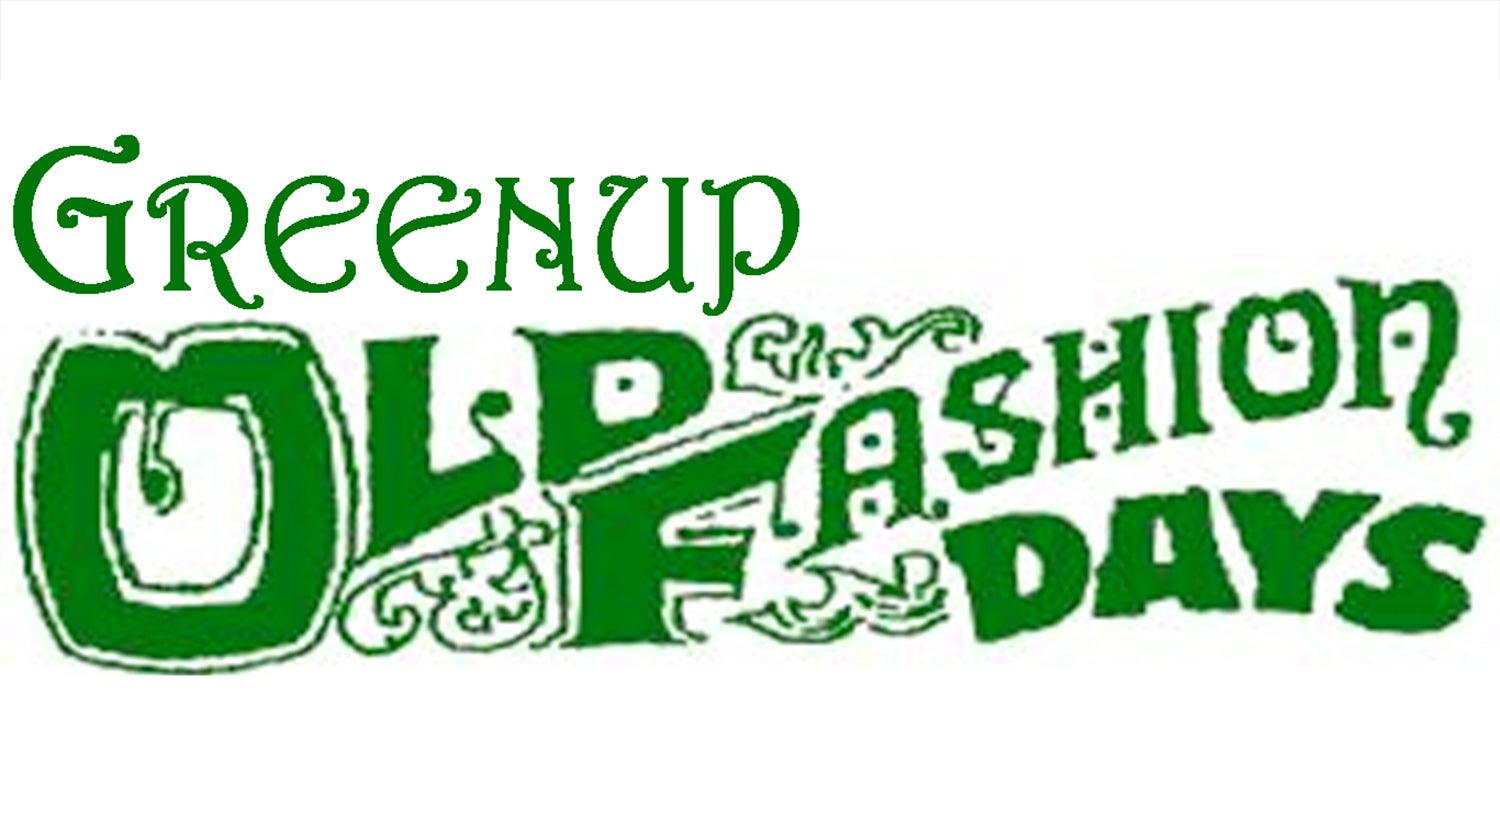 Greenup Old Fashion Days parade is Oct. 2 The Tribune The Tribune